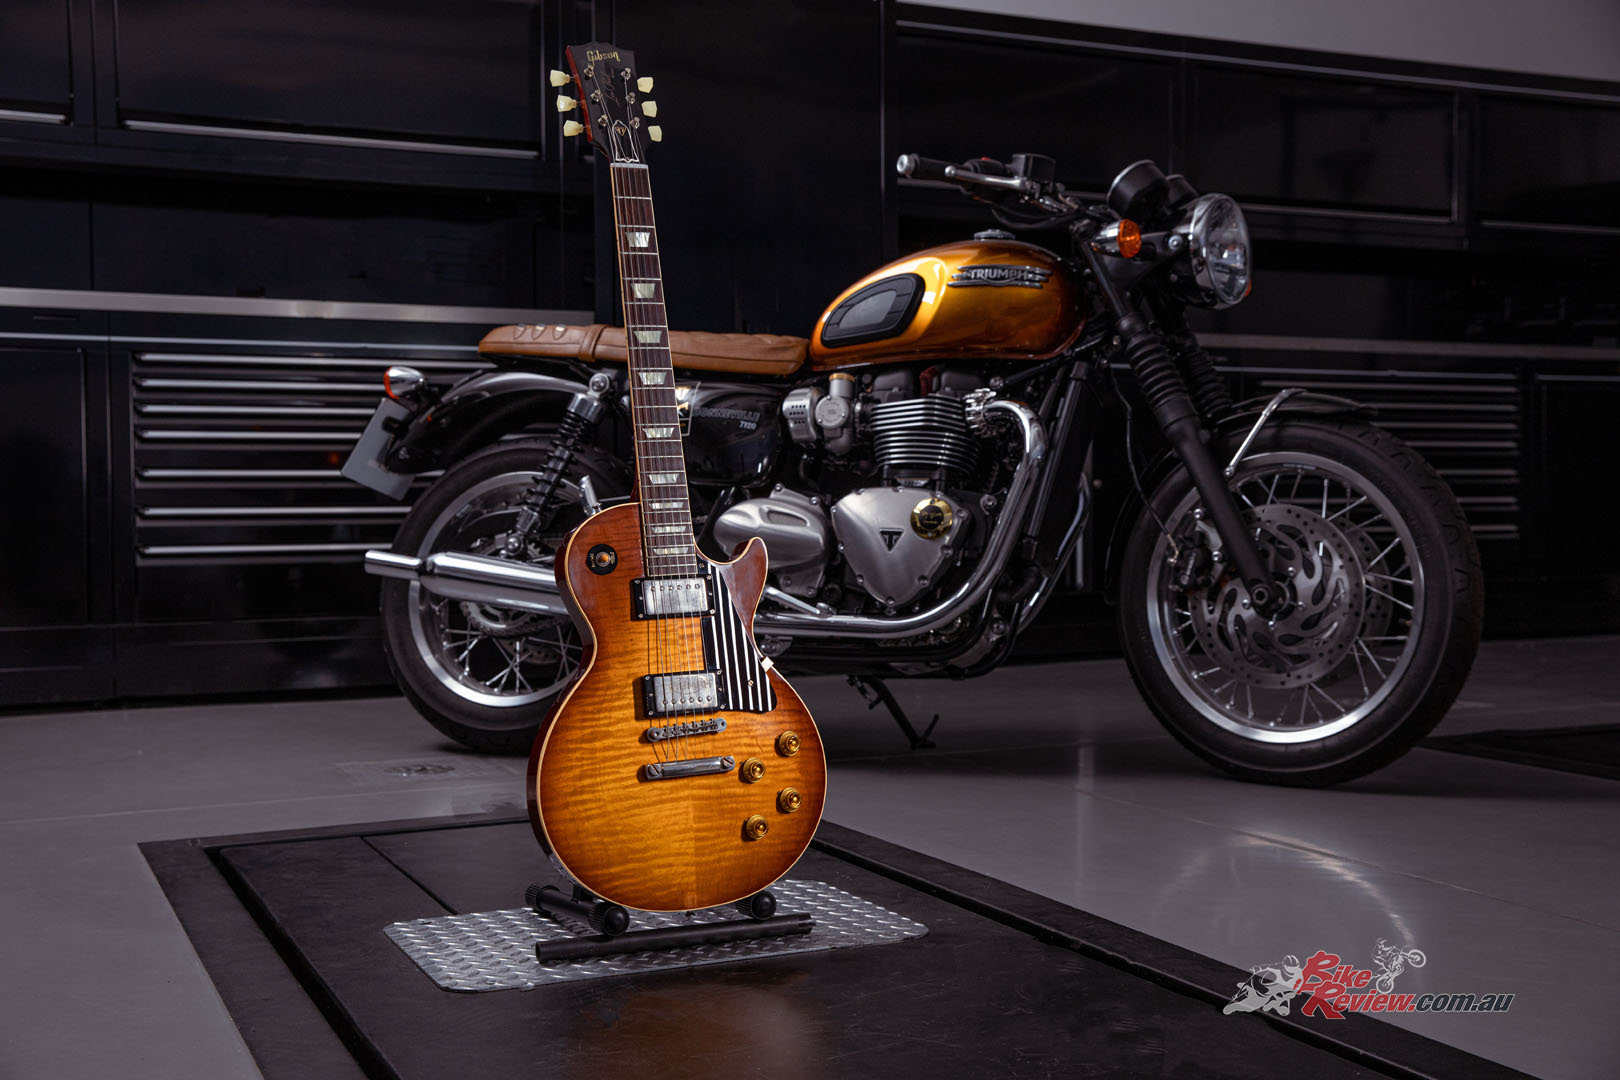 Triumph say they have been building on a shared passion for beauty, precision and performance, and inspired by the shared historical significance of the iconic 1959 Les Paul Standard and equally iconic 1959 Bonneville T120.